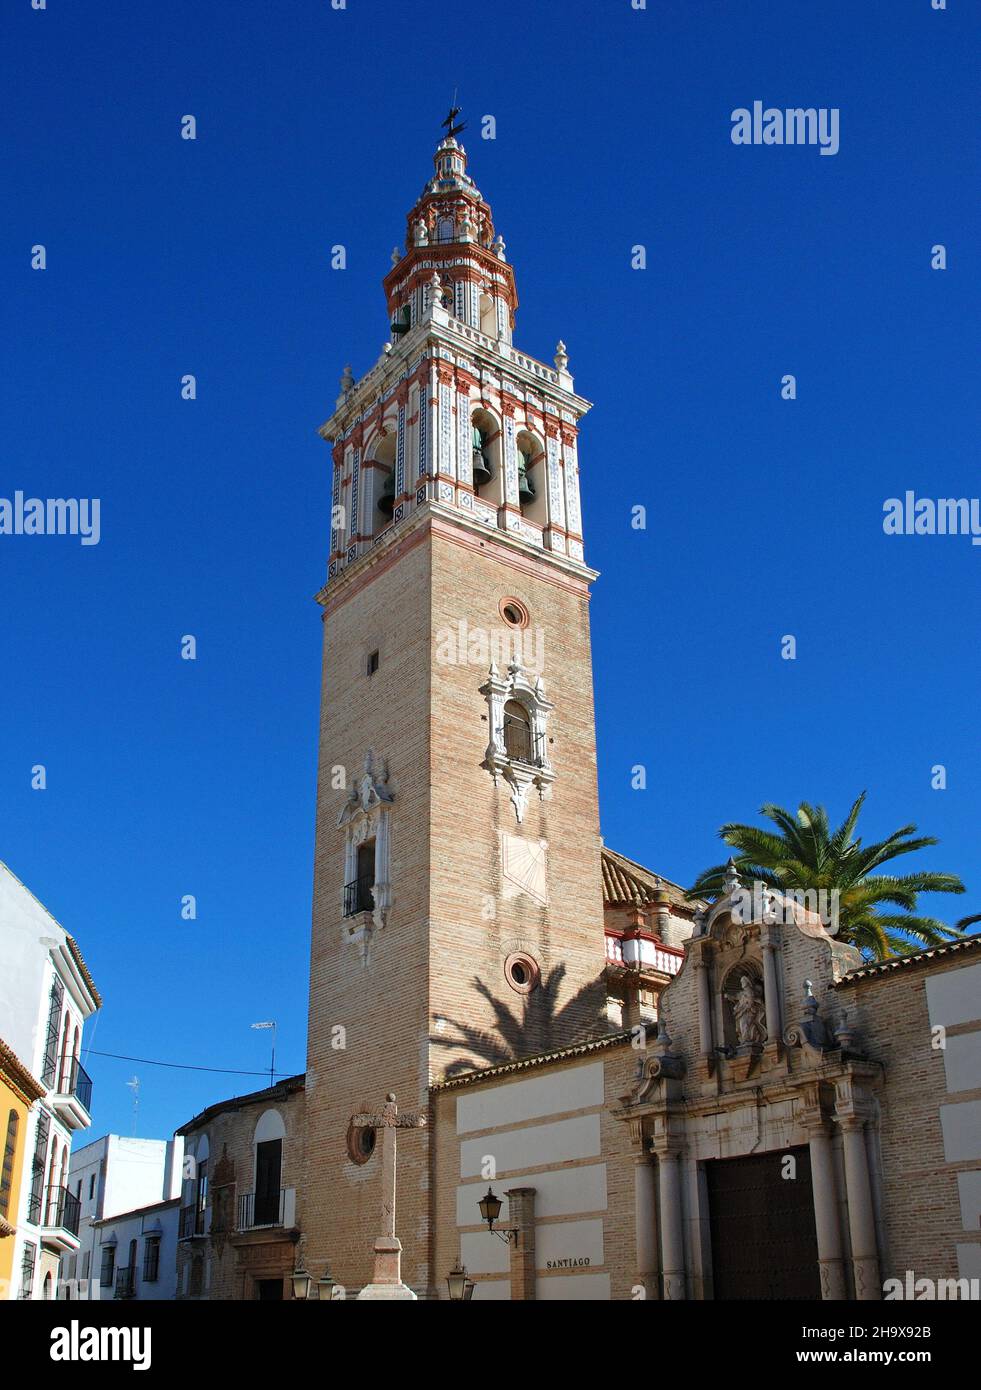 Santiago Parish church bell tower (Parroquial de Santiago) – also known as St. James the Greater church, Ecija, Seville Province, Andalusia, Spain. Stock Photo